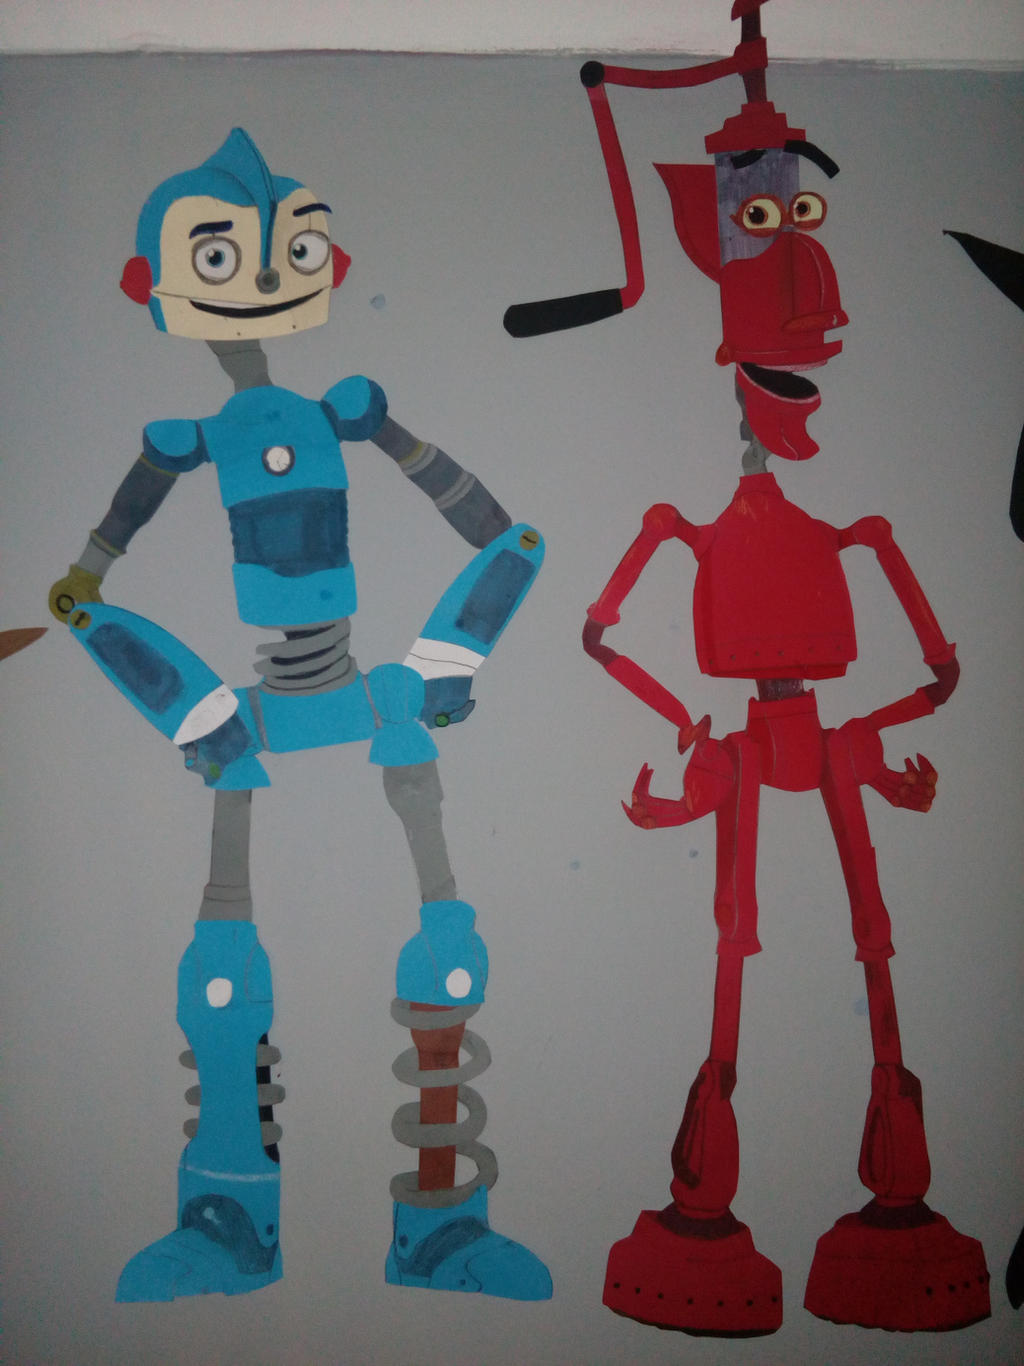 Paper Characters: Robots (2005 movie) by JustSomePainter11 on DeviantArt